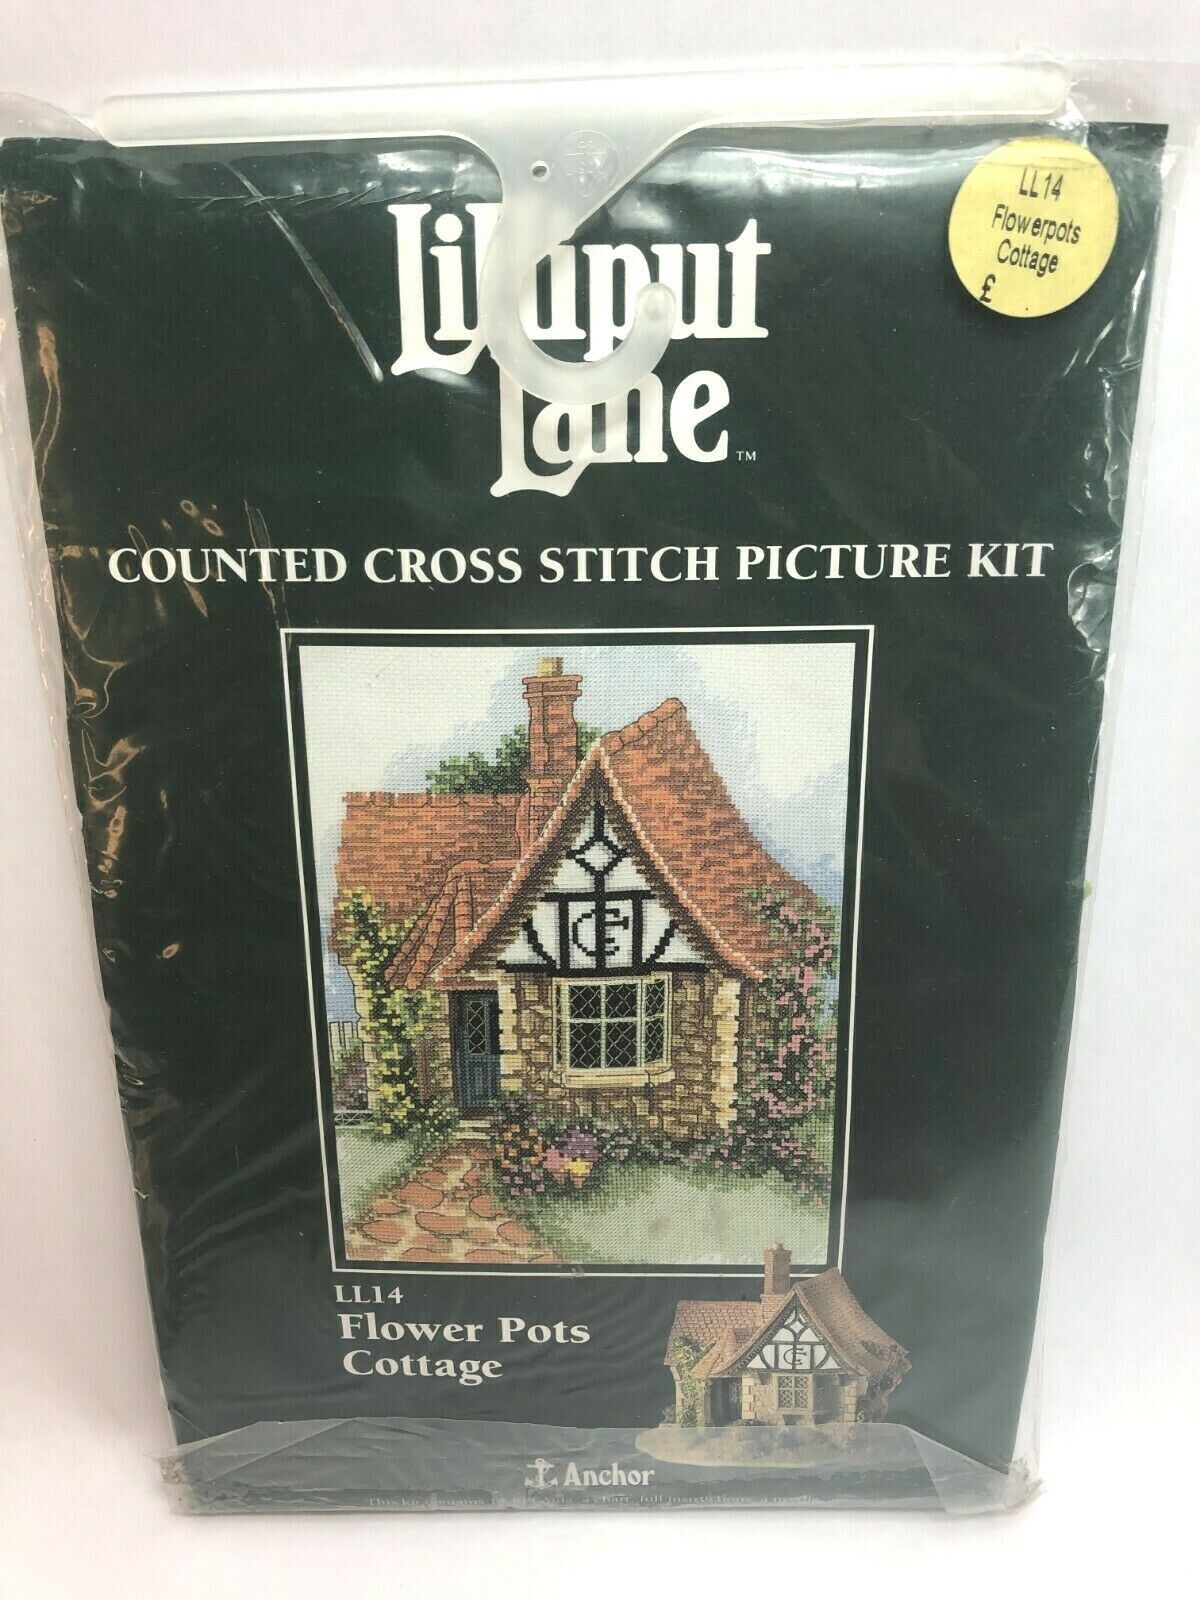 Primary image for Anchor Lilliput Lane Flower Pots Cottage Counted Cross Stitch Picture Kit  LL14